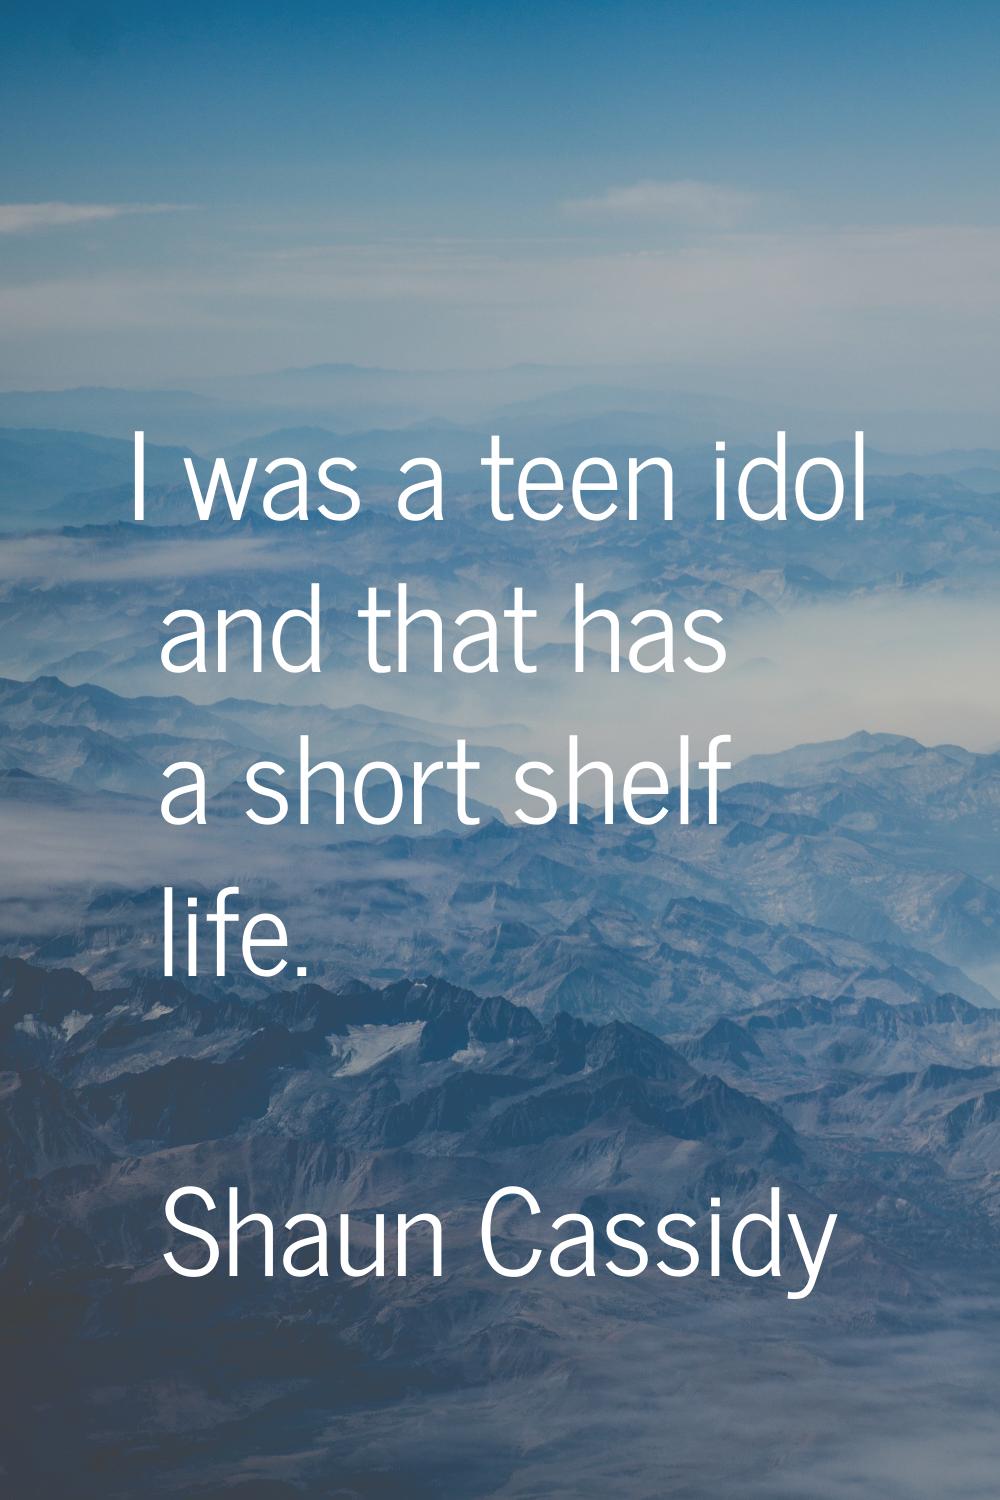 I was a teen idol and that has a short shelf life.